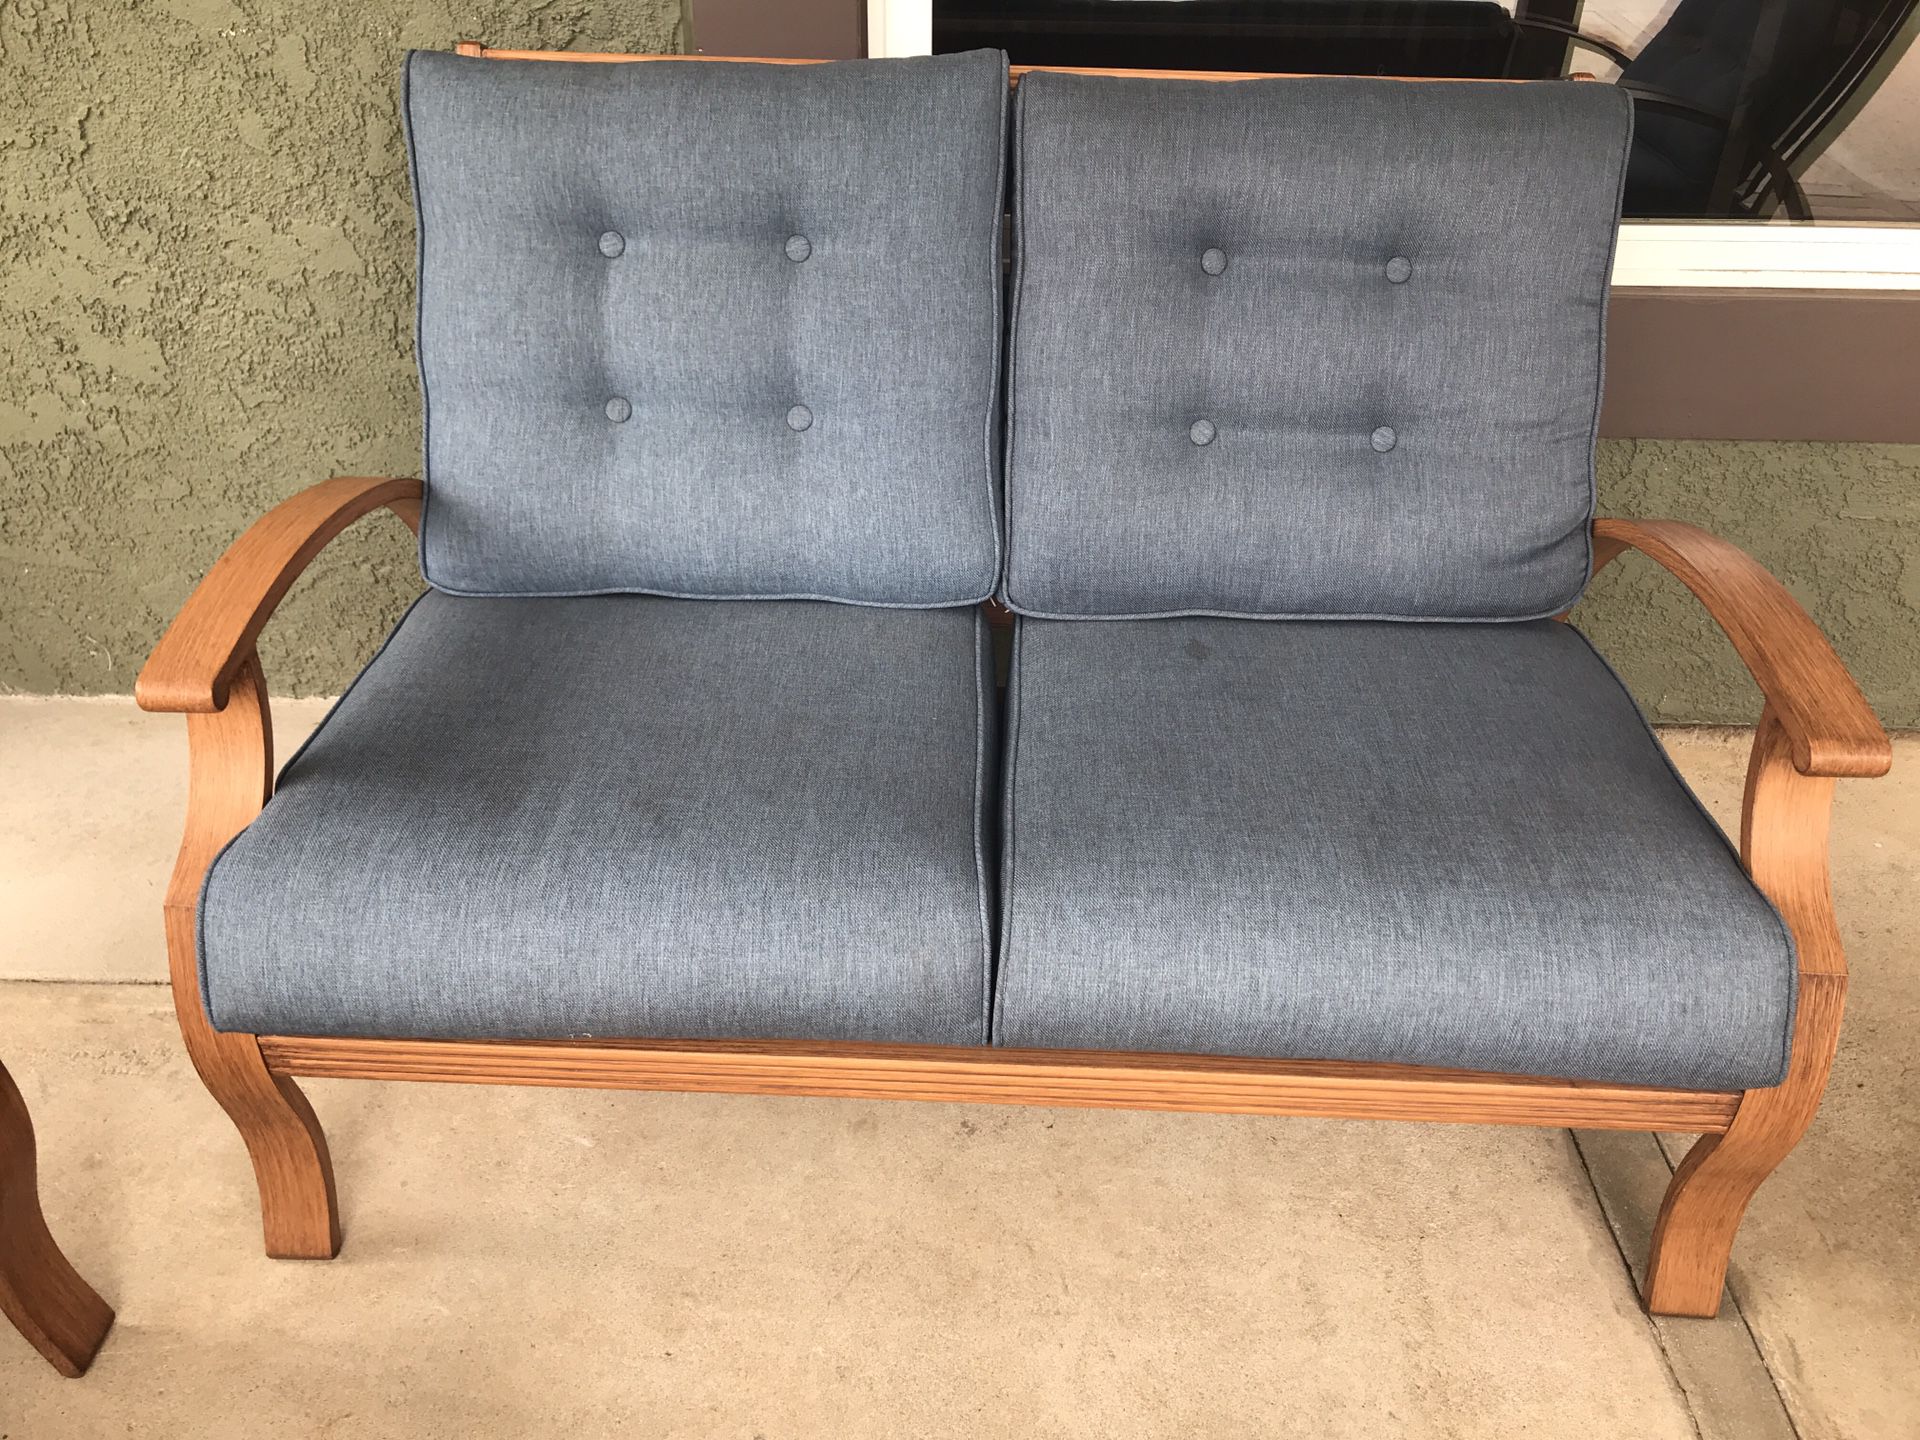 Patio Furniture - Loveseat, 2 Chairs and Coffee Table